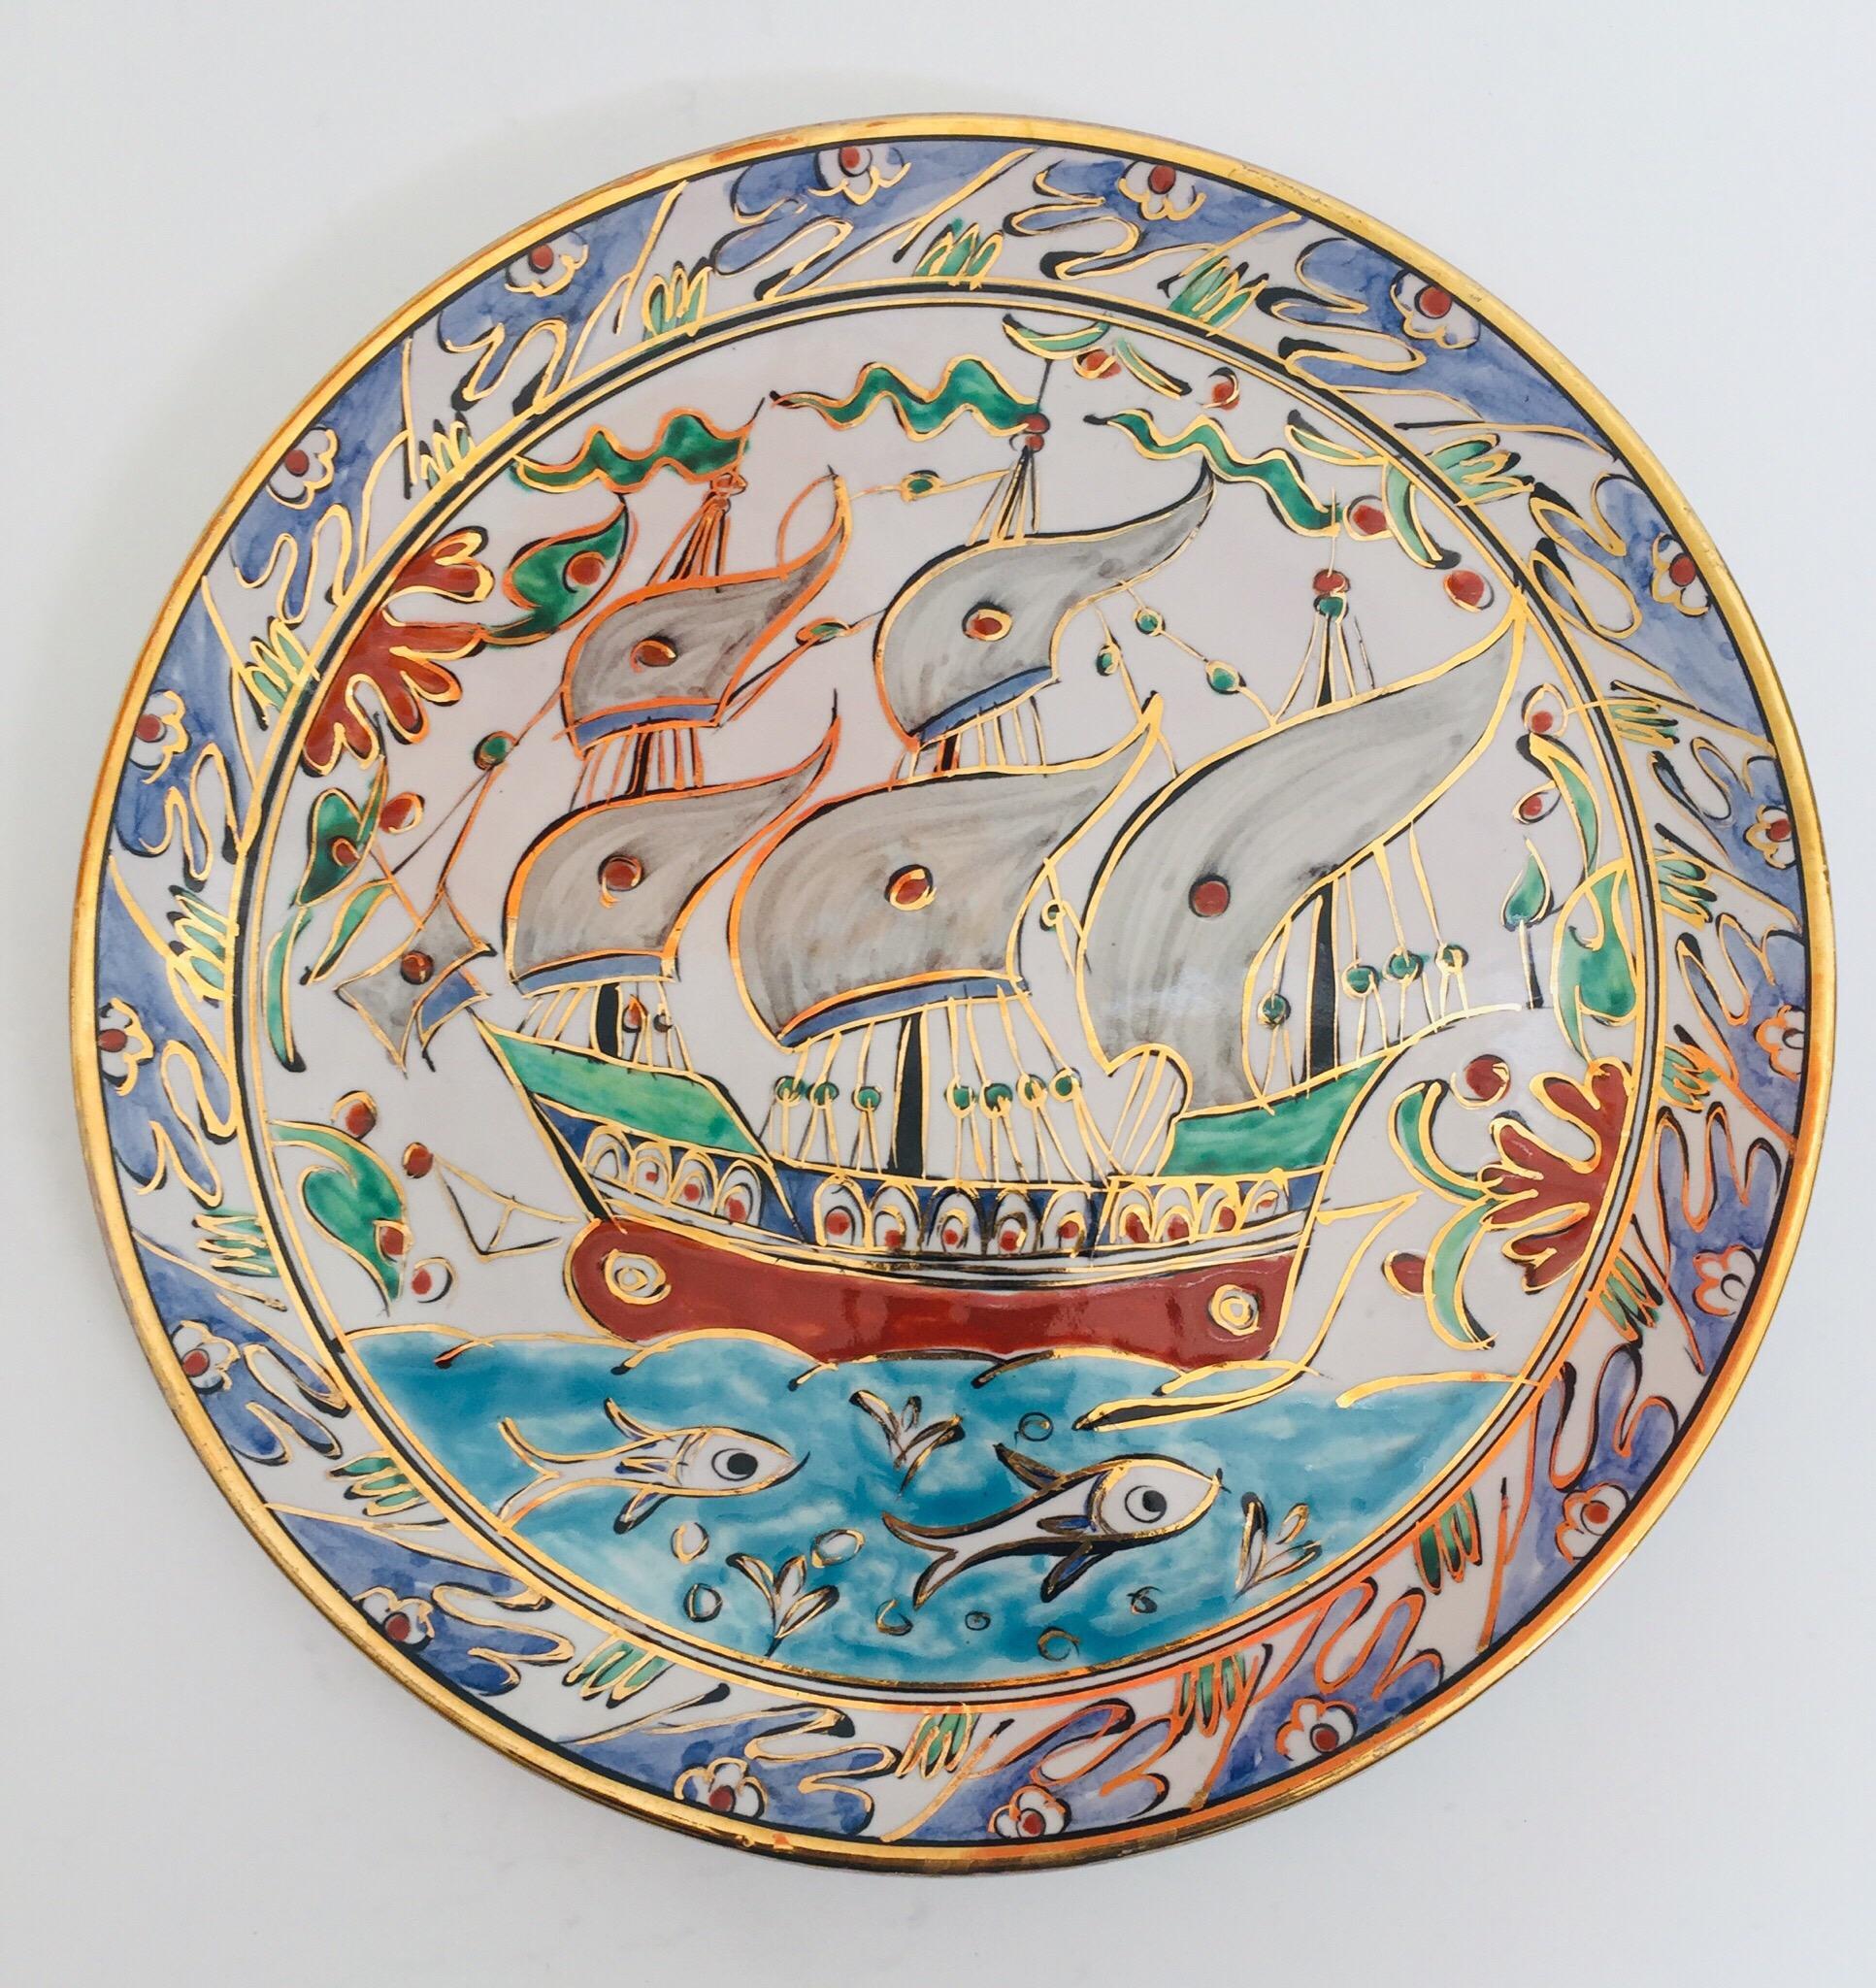 A decorative I Karos Pottery, I Caro collector polychrome hand painted and handcrafted in Rhodes, Greece ceramic wall decorative plate with a boat in the sea and Fish Design in polychrome design.
The plate is decorated with a white, blue, aqua,